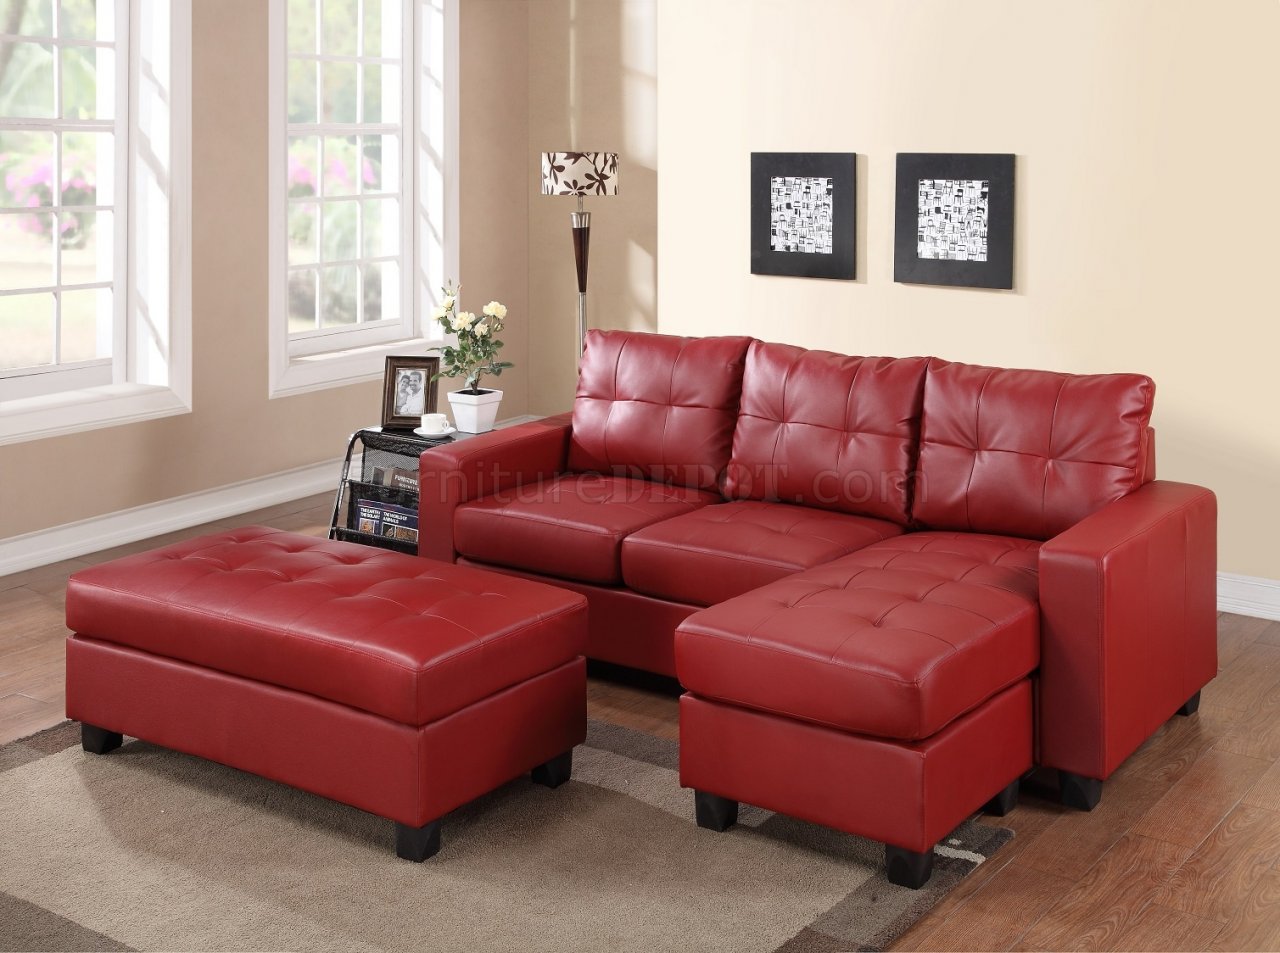 red bonded leather sofa set